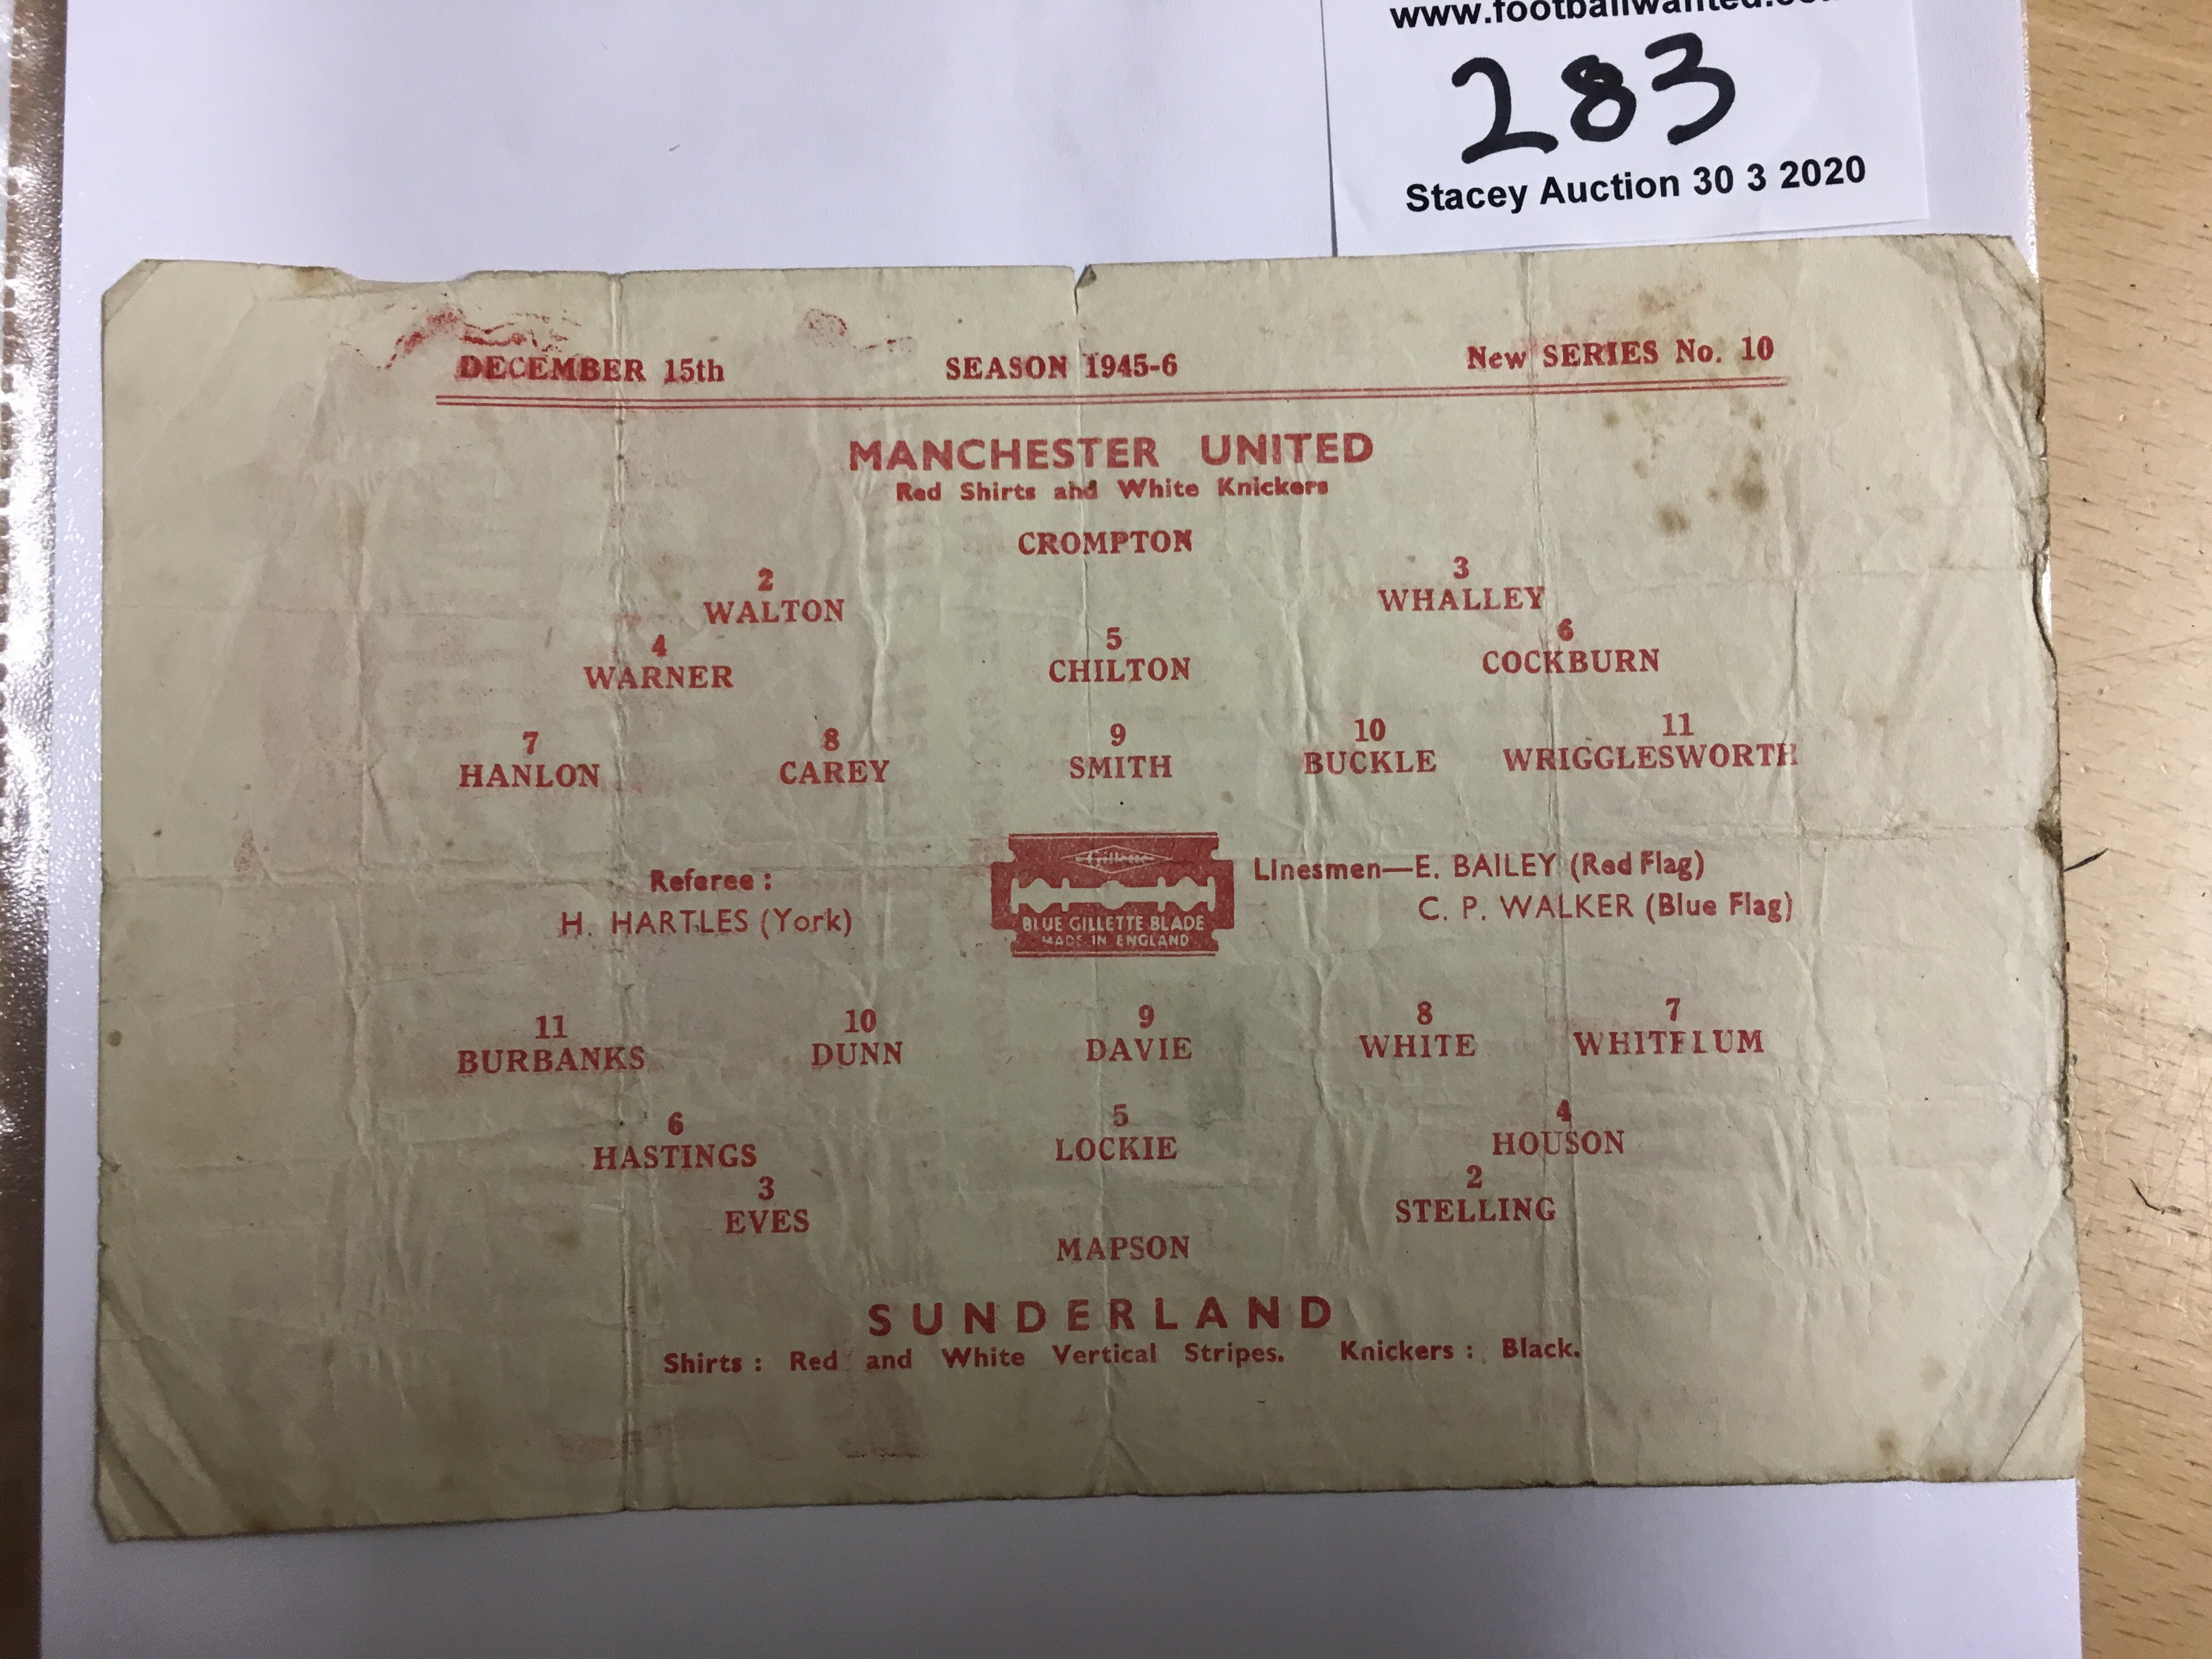 45/46 Manchester United v Sunderland Football Programme: Fair condition League match with no writing - Image 2 of 2